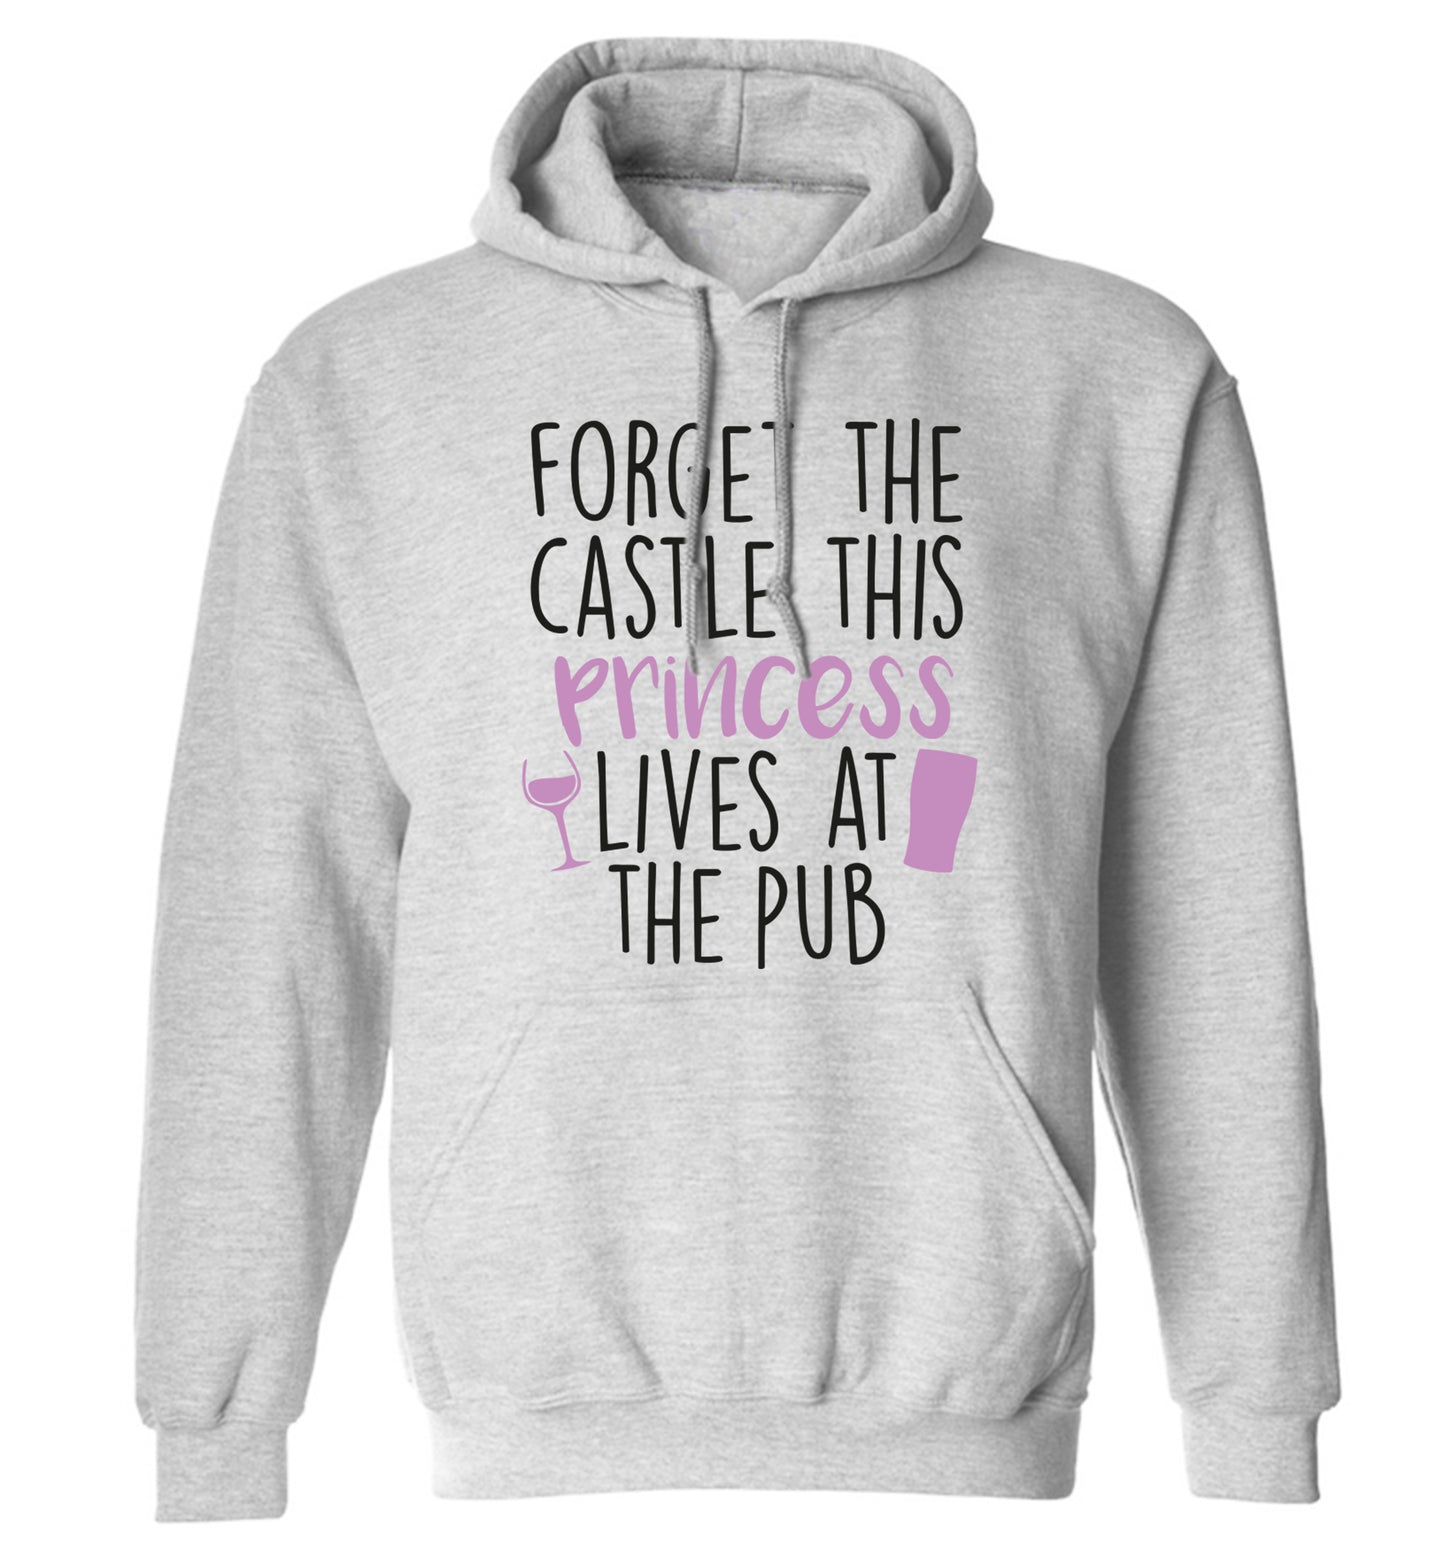 Forget the castle this princess lives at the pub adults unisex grey hoodie 2XL